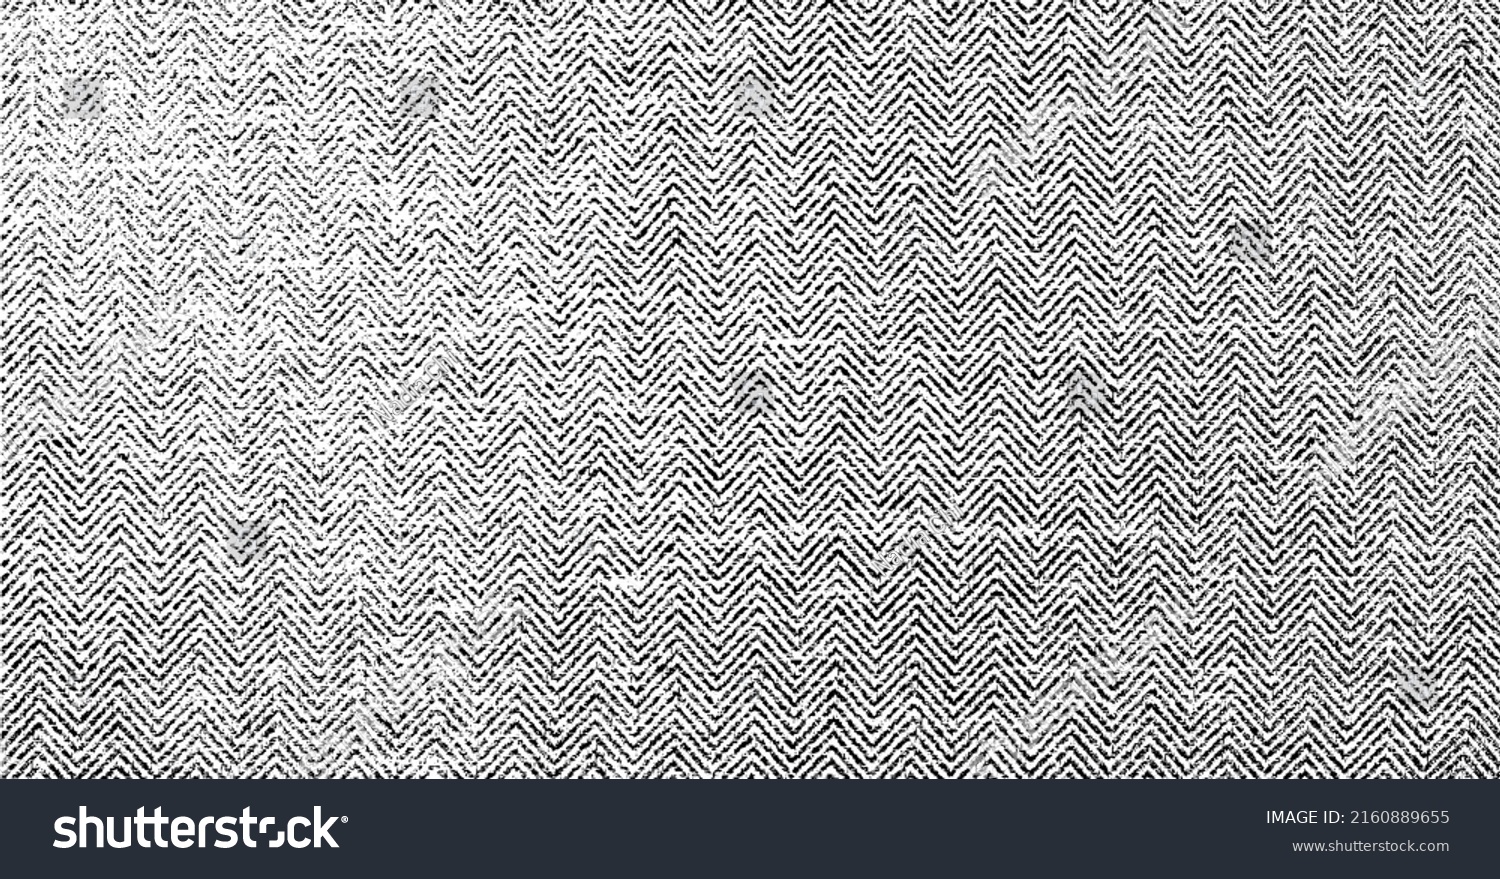 Vector fabric texture. Distressed texture of weaving fabric. Grunge background. Abstract halftone vector illustration. Overlay to create interesting effect and depth. Black isolated on white. EPS10. #2160889655